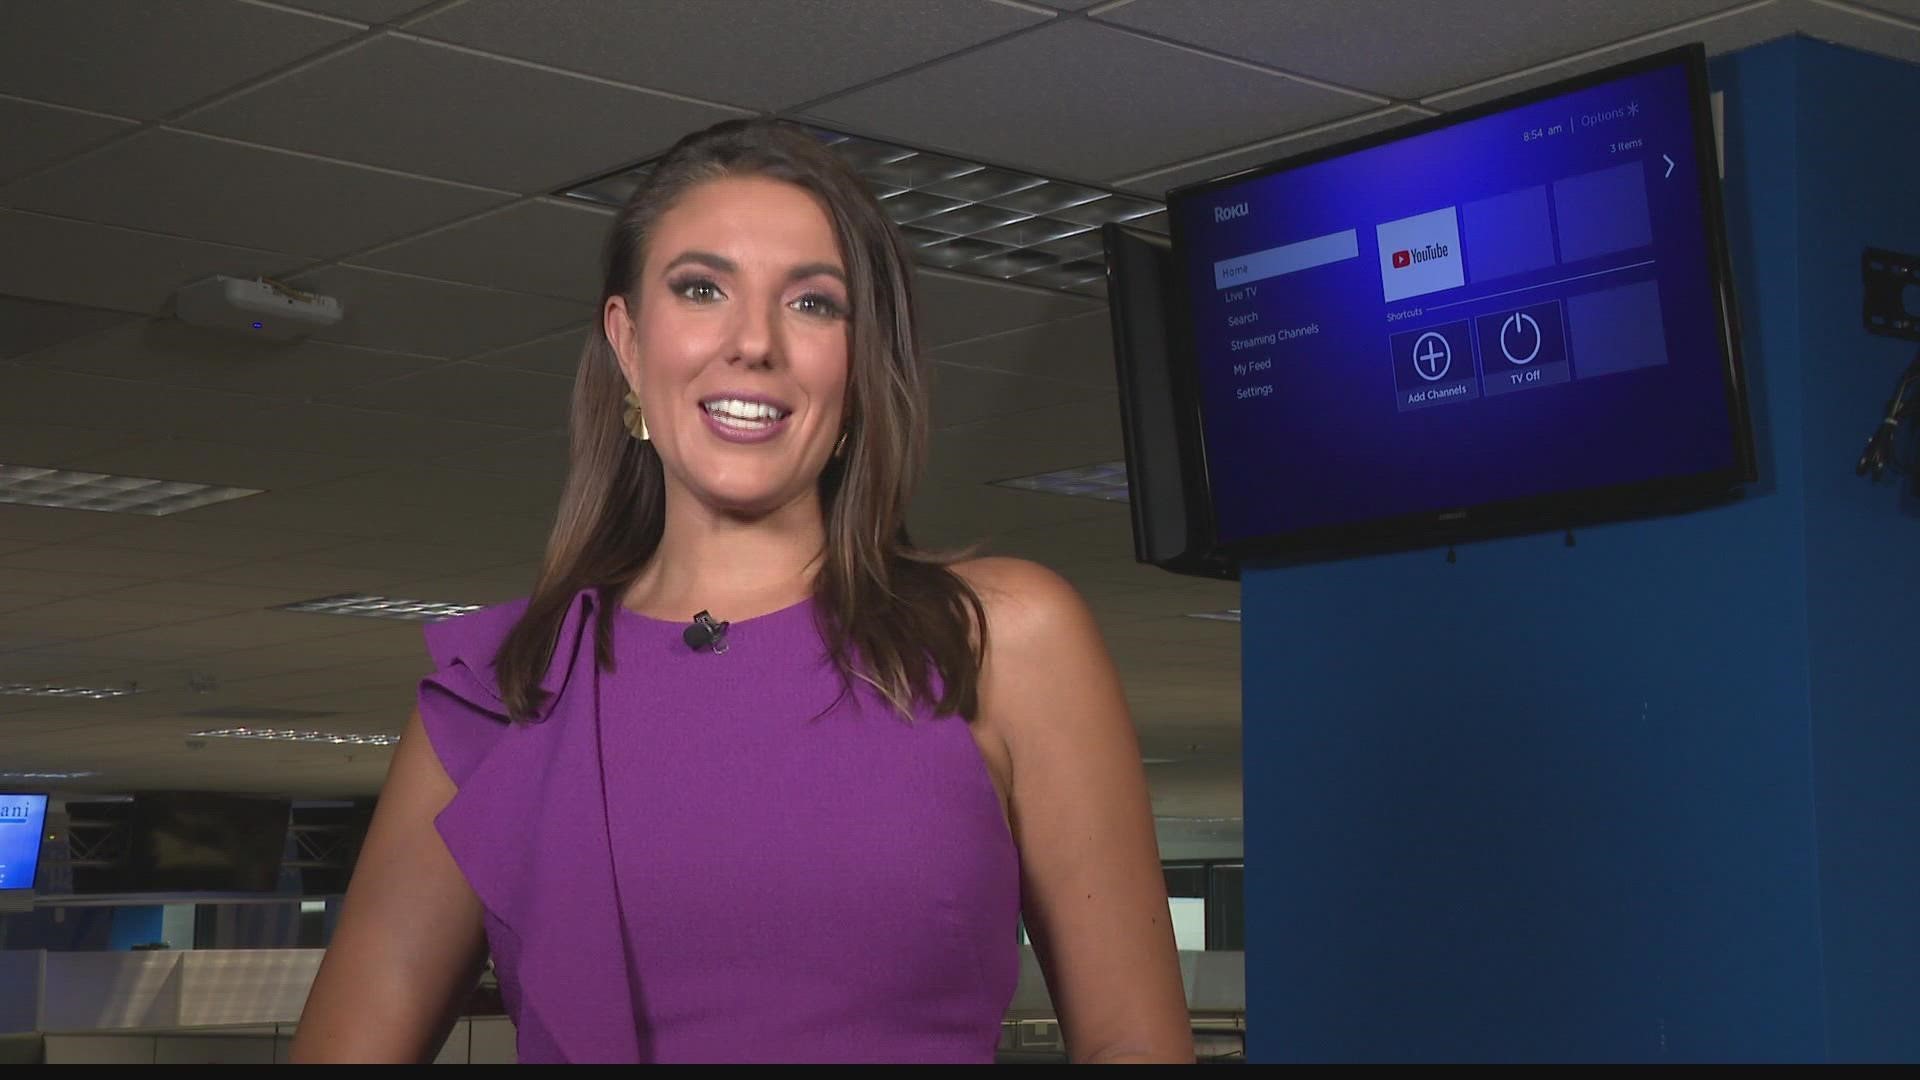 If you have a Roku streaming device, here's how to install the 12News app so you can watch broadcasts 24/7. Emily Pritchard shows us how.